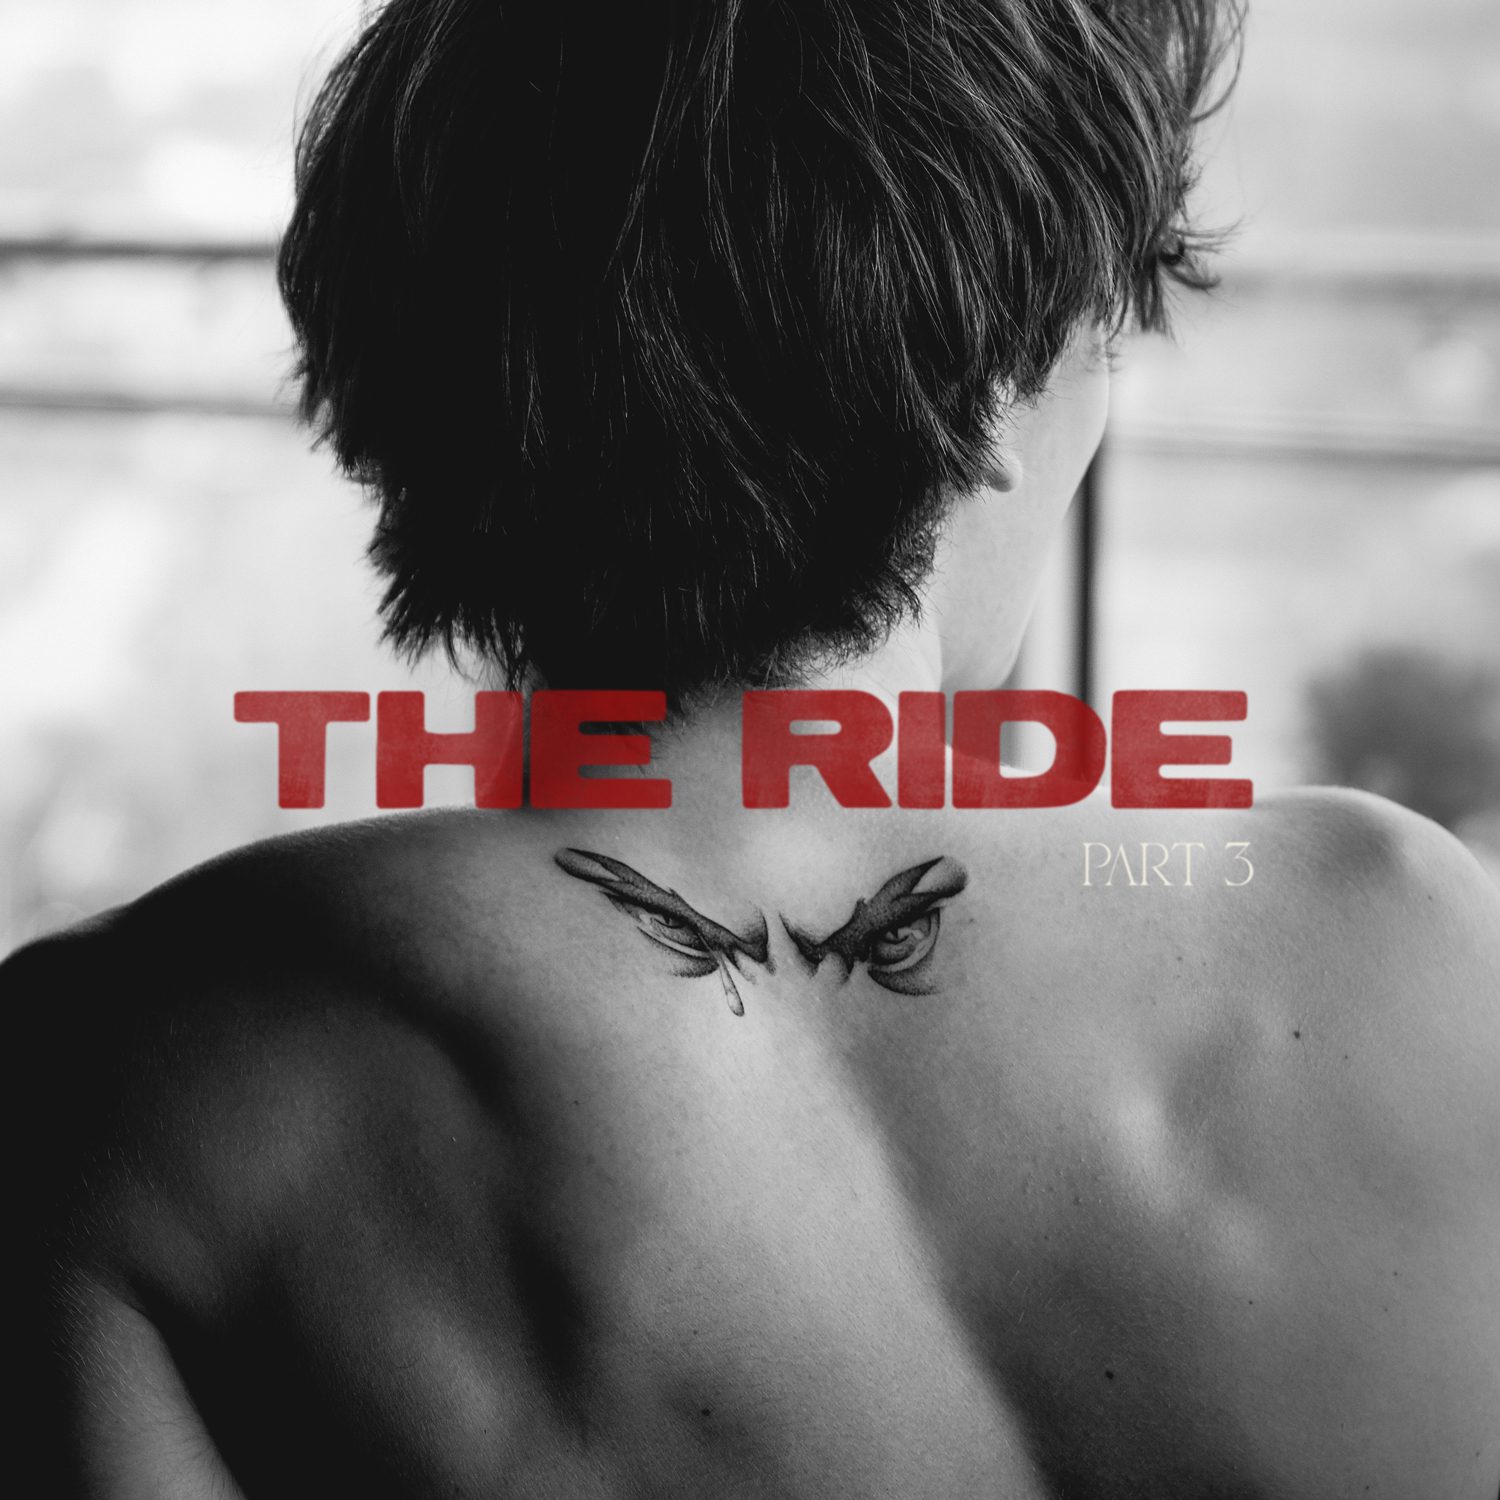 JOHNNY ORLANDO RELEASES THIRD COLLECTION OF SONGS THE RIDE: PART 3, OUT TODAY